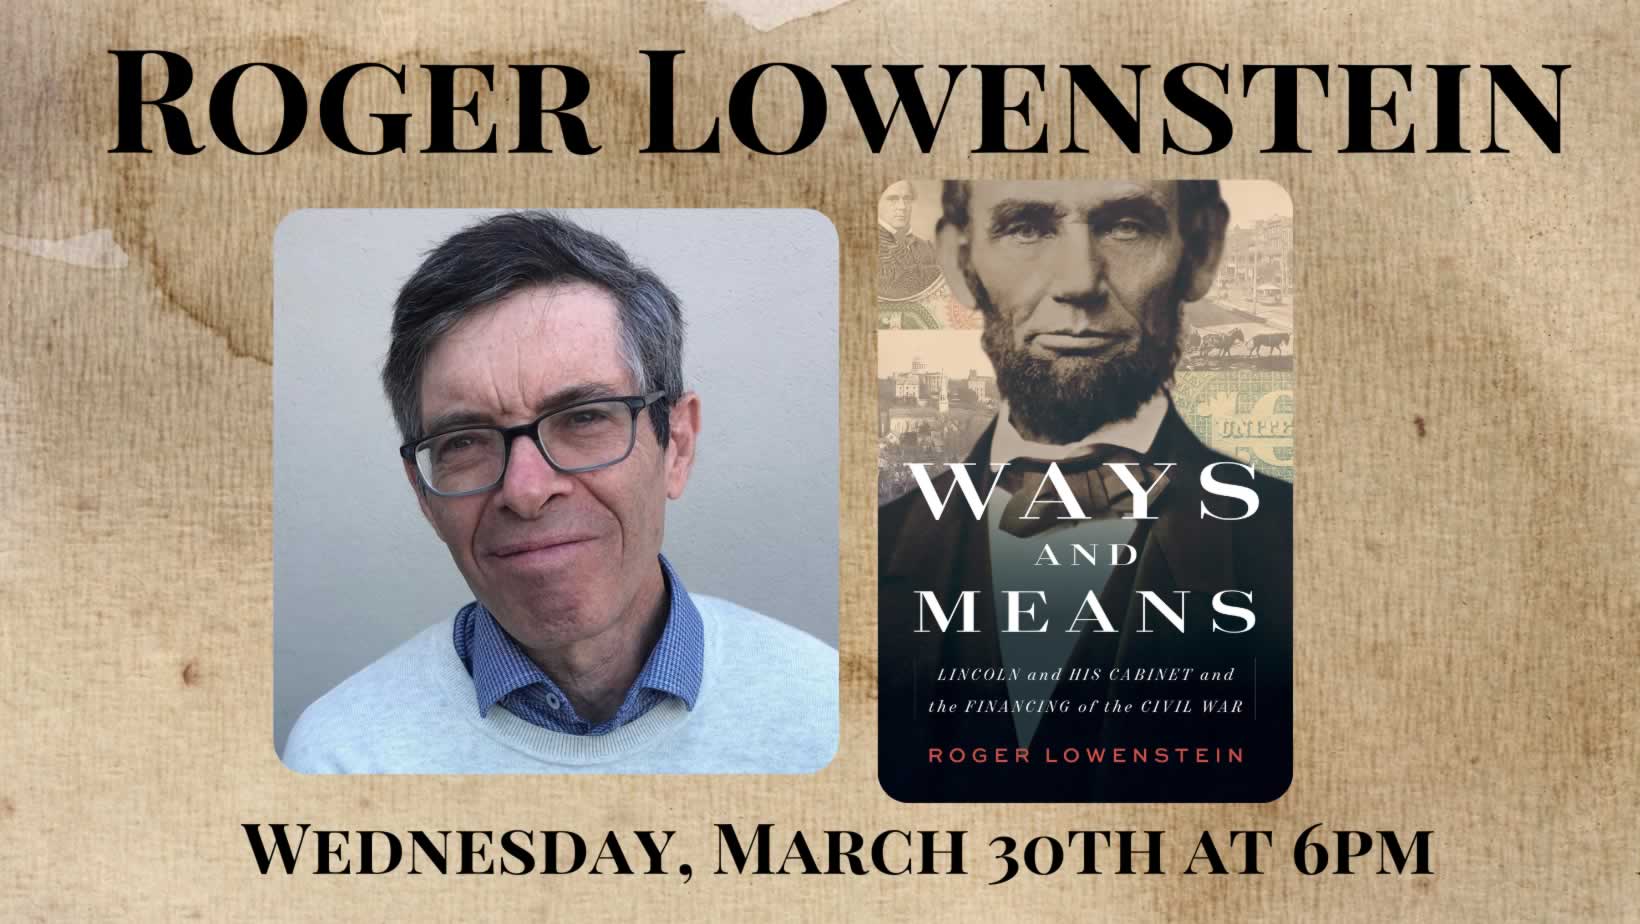 Roger Lowenstein presents Ways and Means